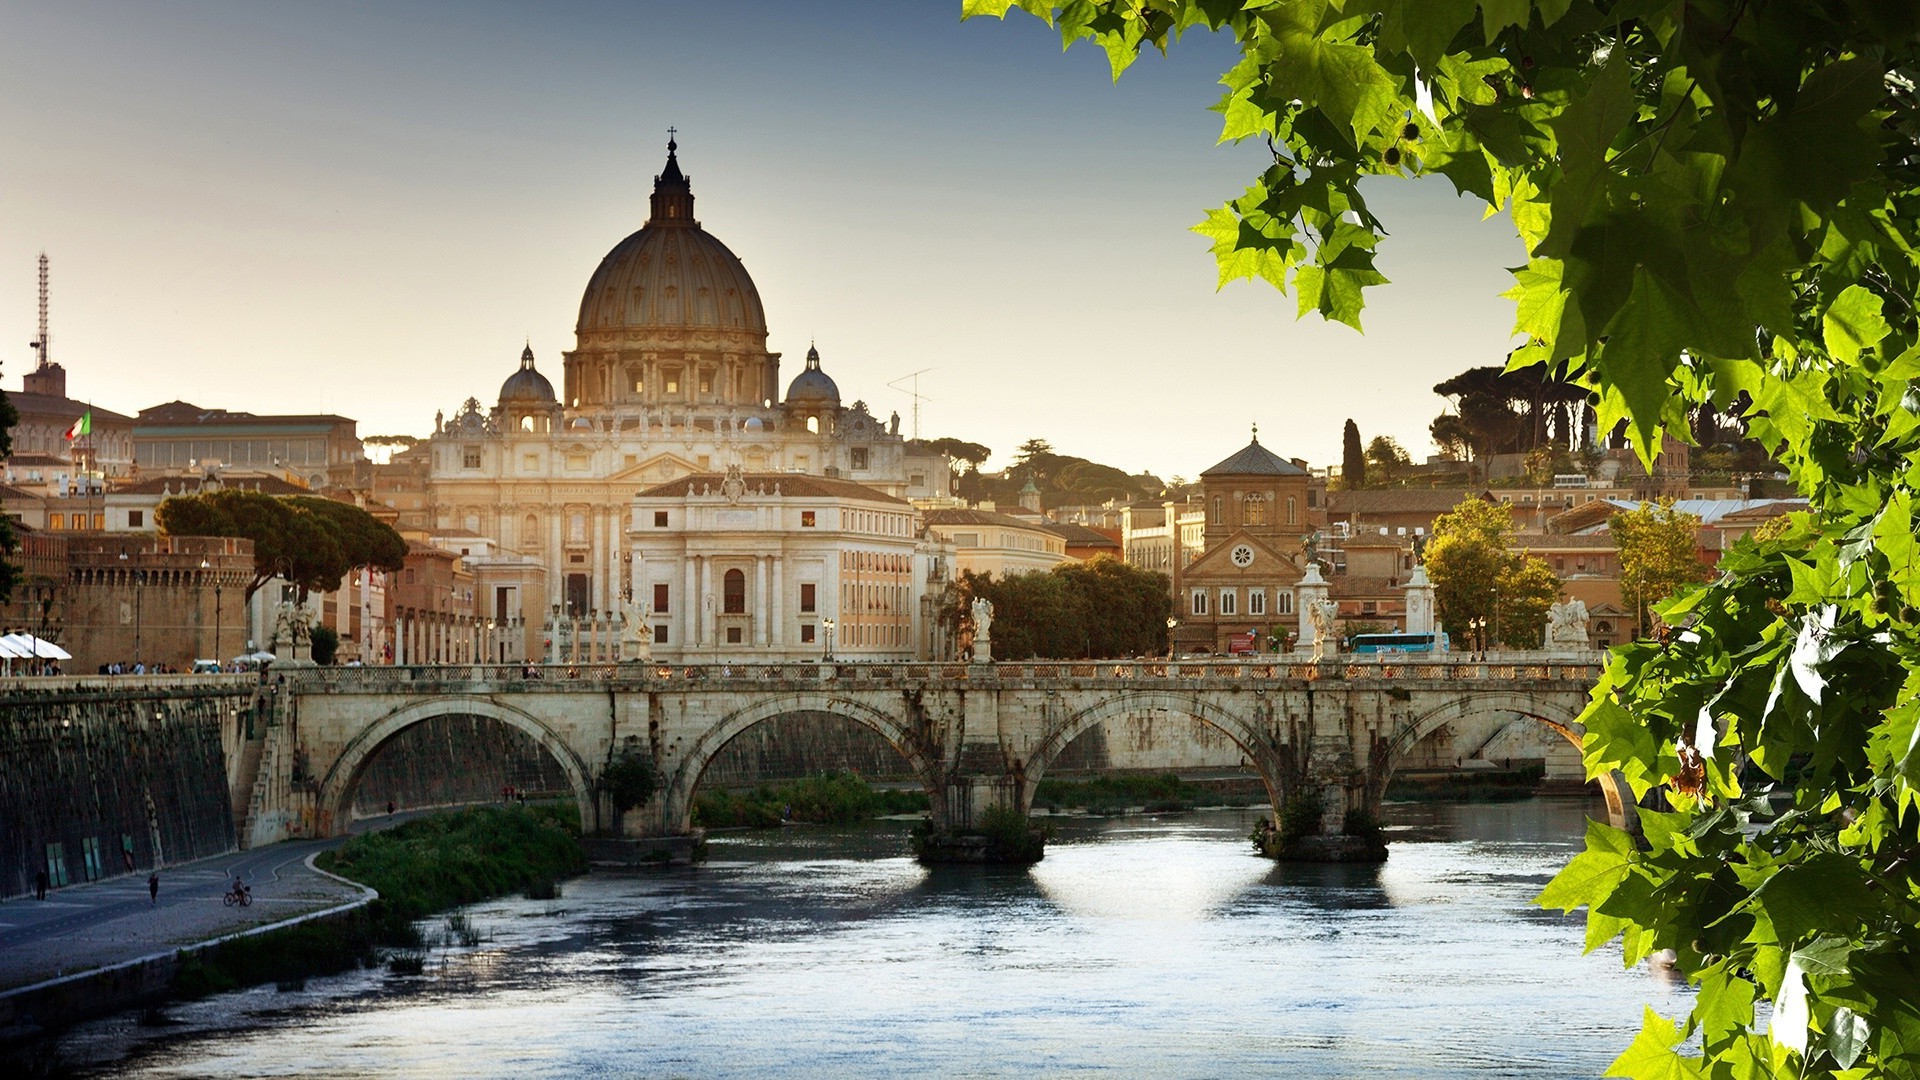 cityscape, Architecture, Rome, Italy, Old Building, Trees, Cathedral, Bridge, River, Walls, Sunlight Wallpaper